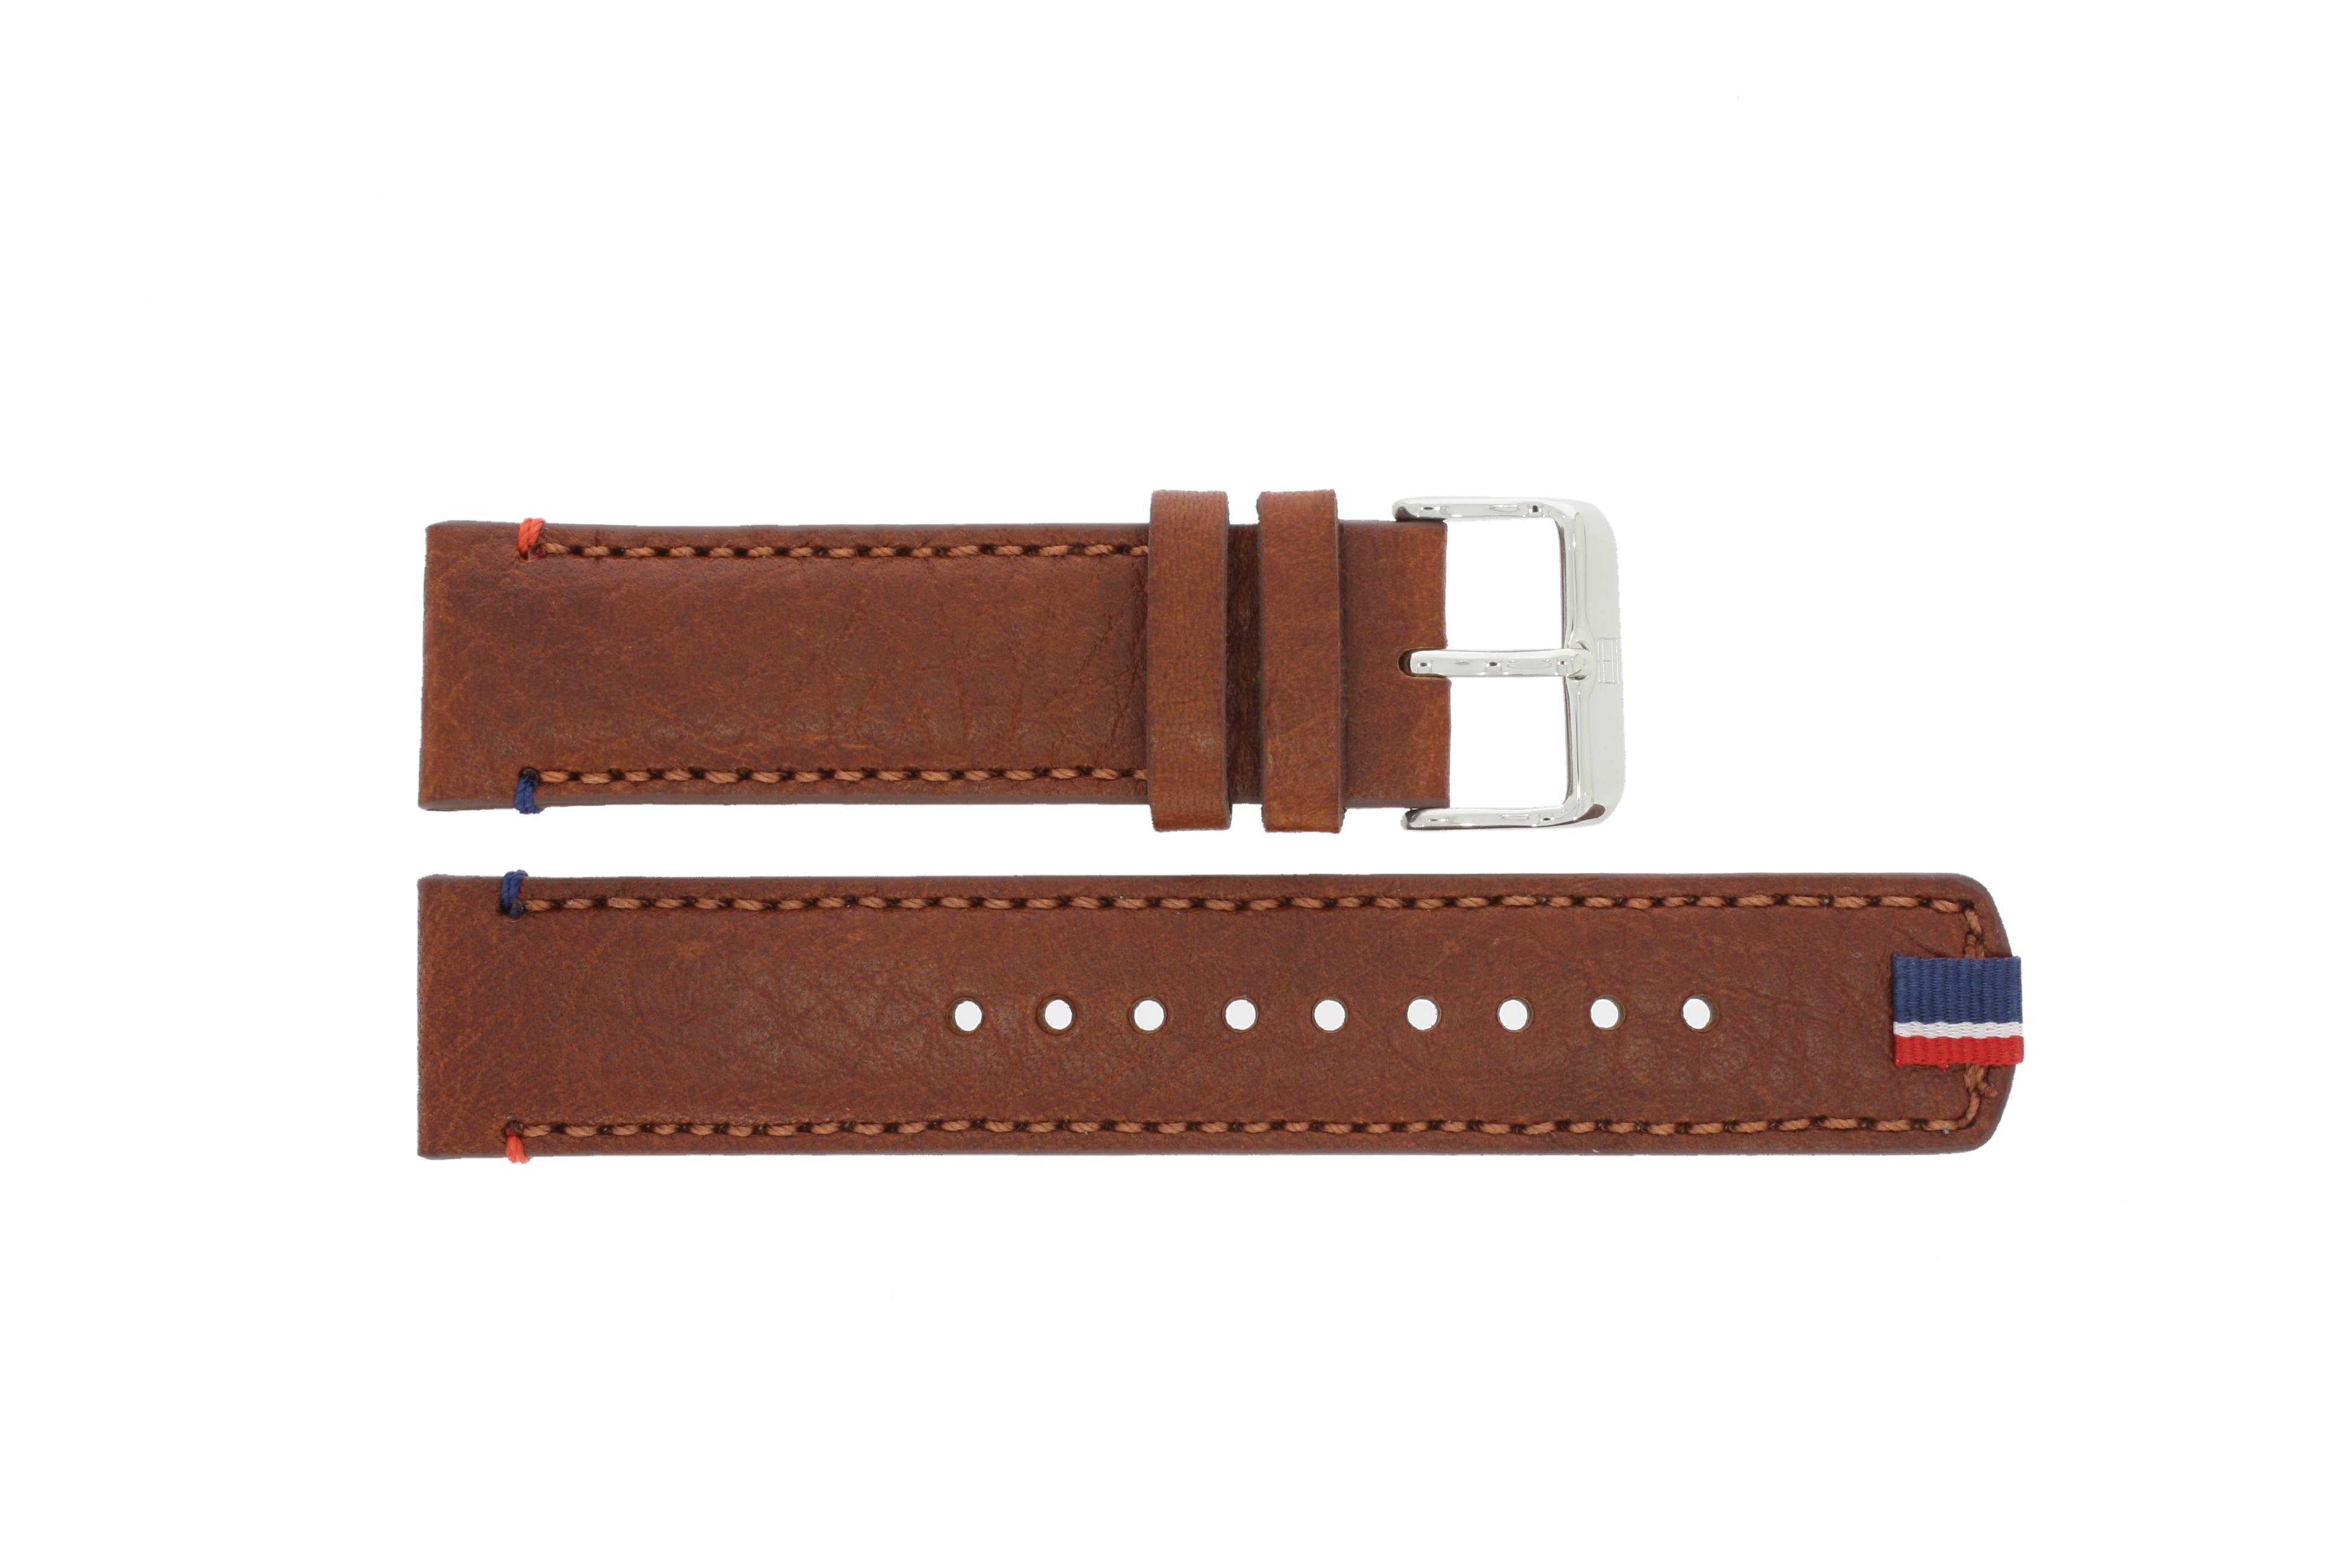 tommy hilfiger watch strap replacement